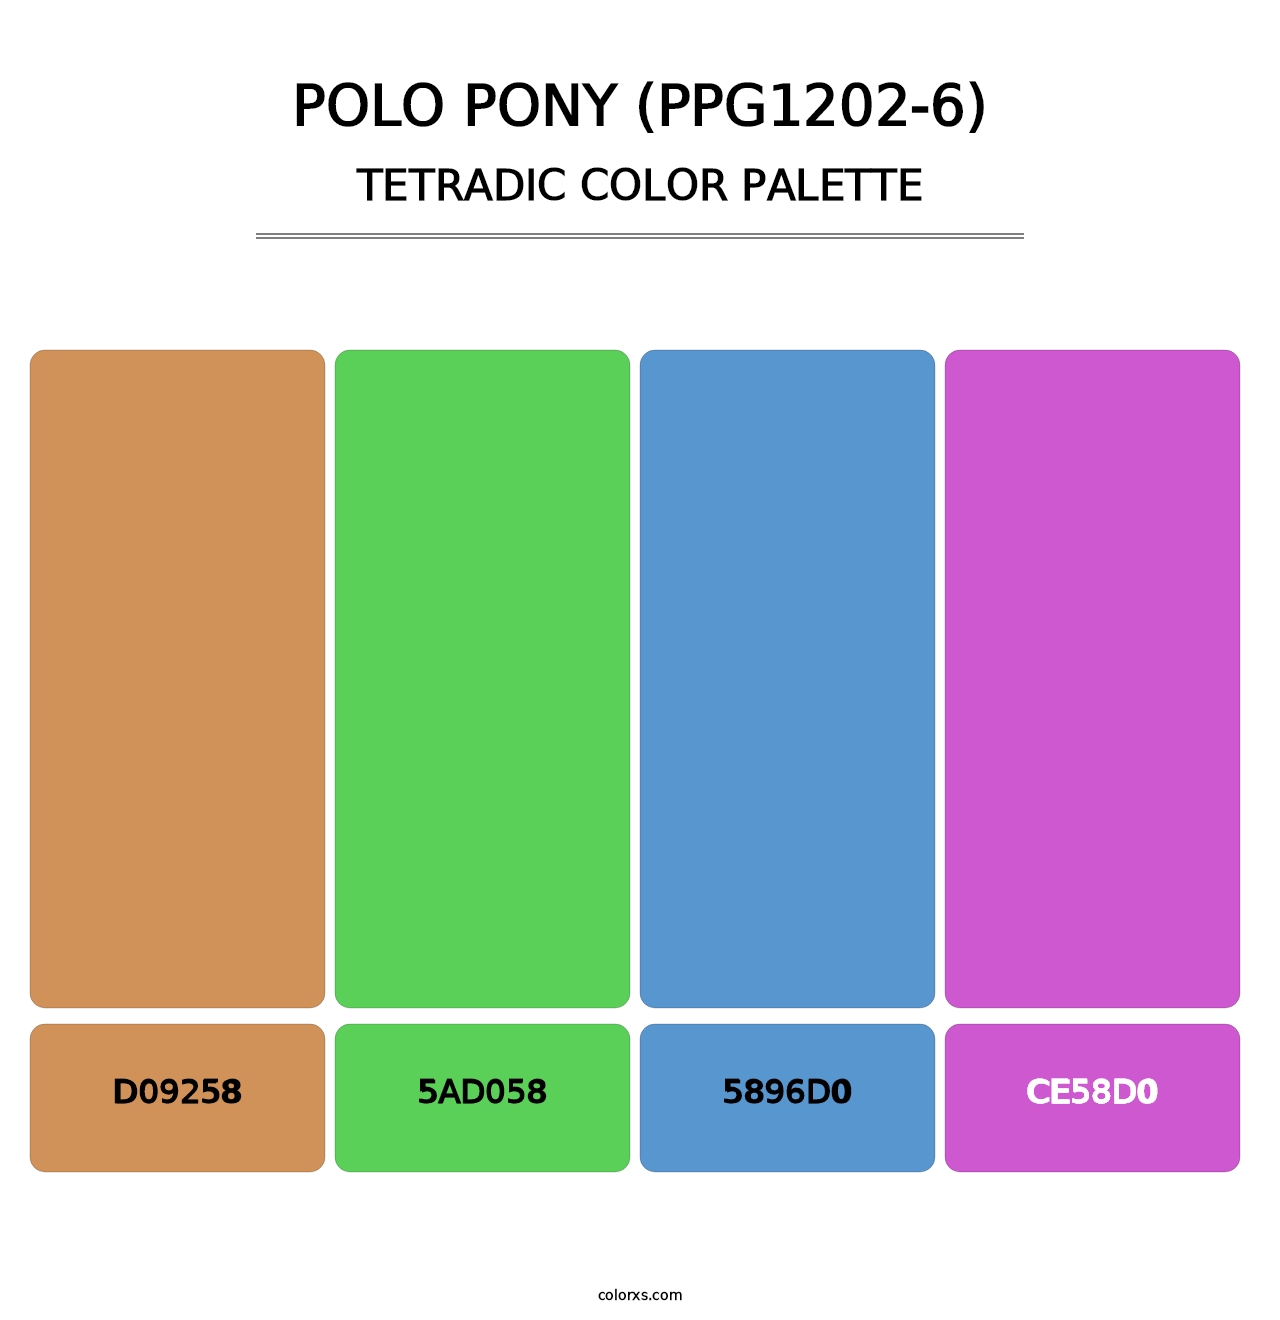 Polo Pony (PPG1202-6) - Tetradic Color Palette